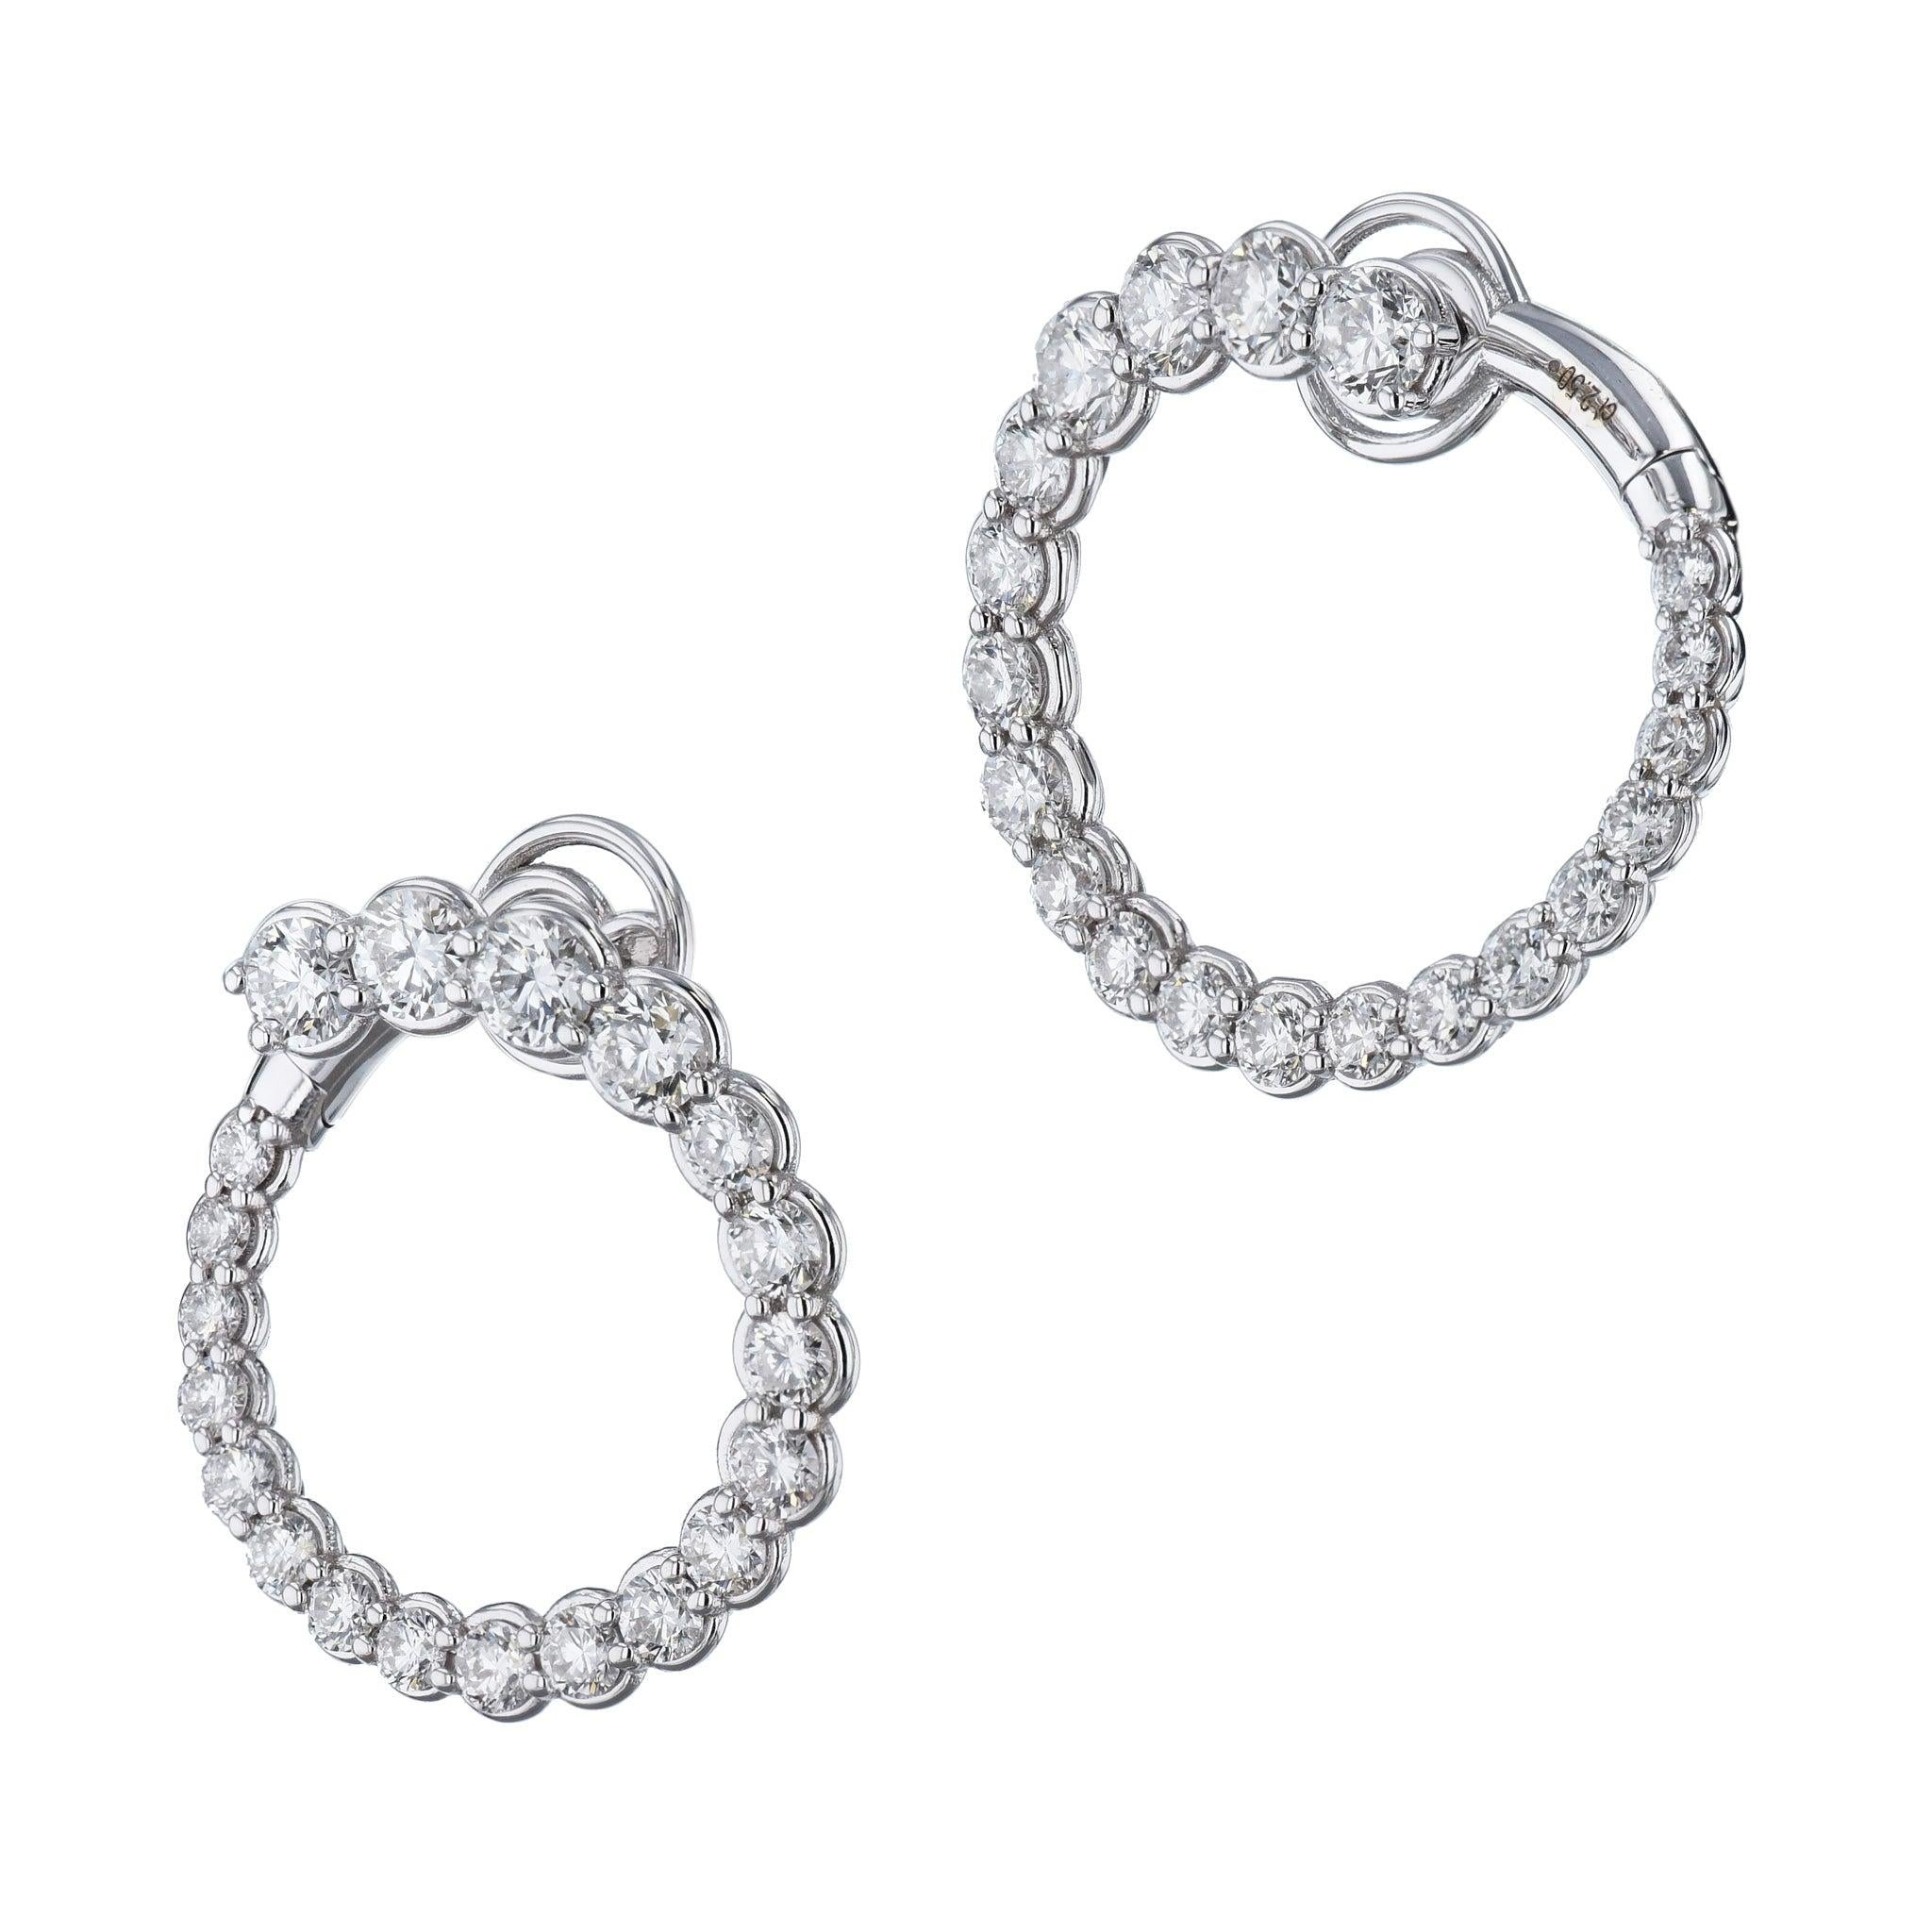 These beautiful 18 karat white gold earrings sparkle and dazzle with diamonds! 
Make a statement and treat yourself to these beautiful and luxurious earrings. 
There is a total of 2.50 carats of F colored diamonds with VS2/SI1 clarity. 
These